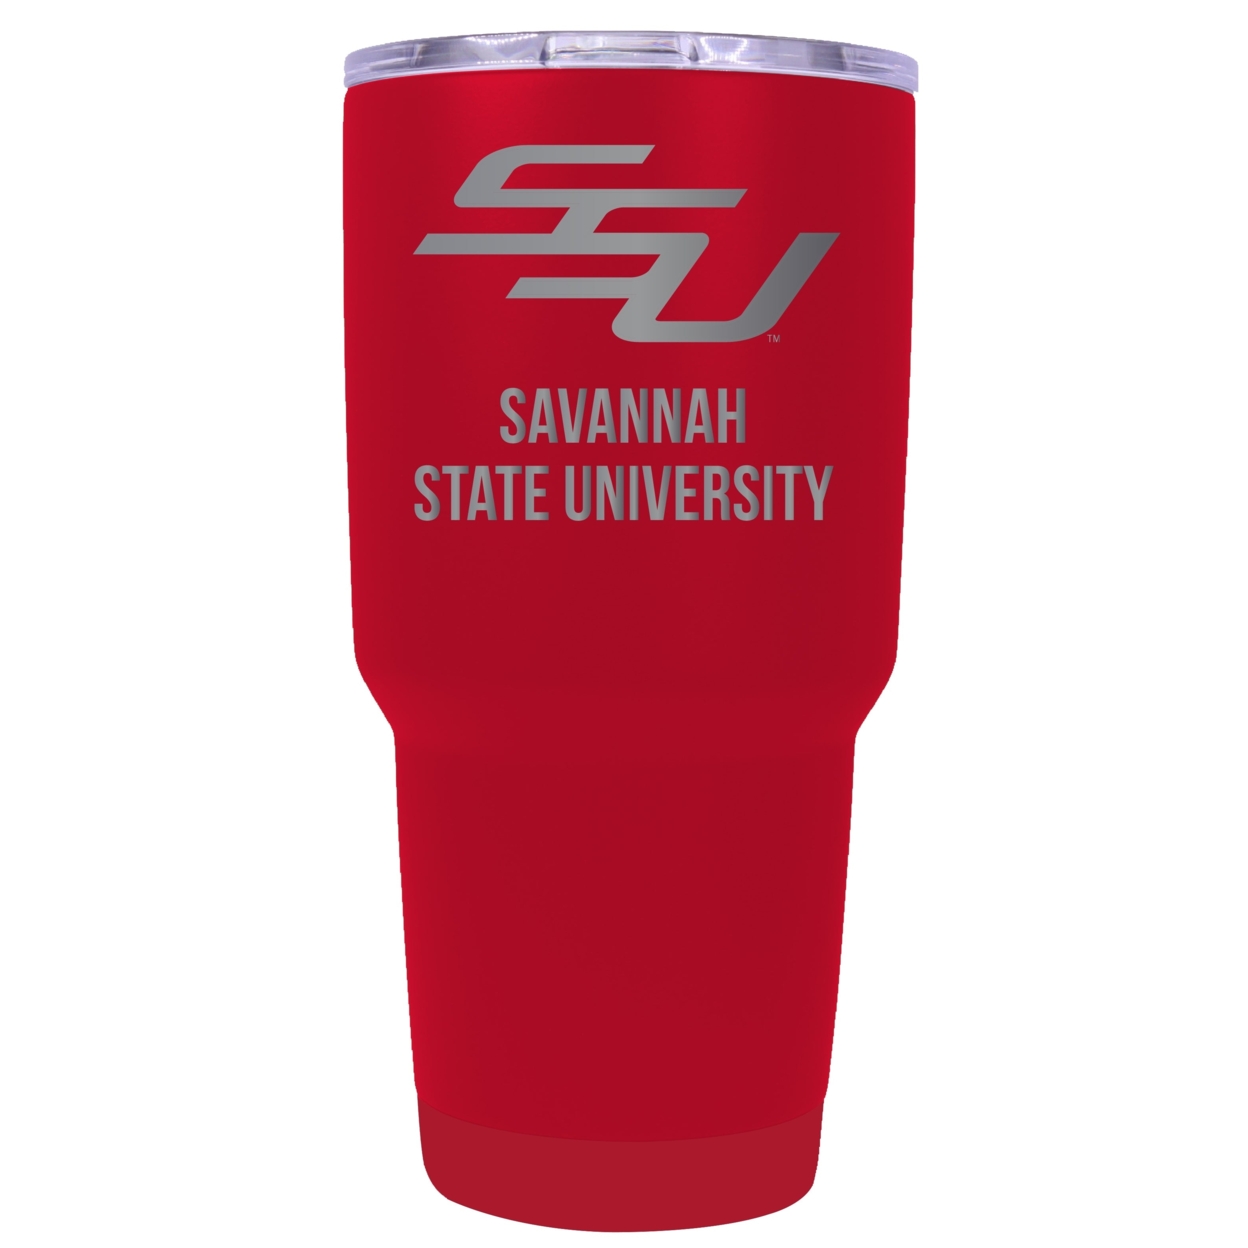 Savannah State University 24 Oz Laser Engraved Stainless Steel Insulated Tumbler - Choose Your Color. - Coral